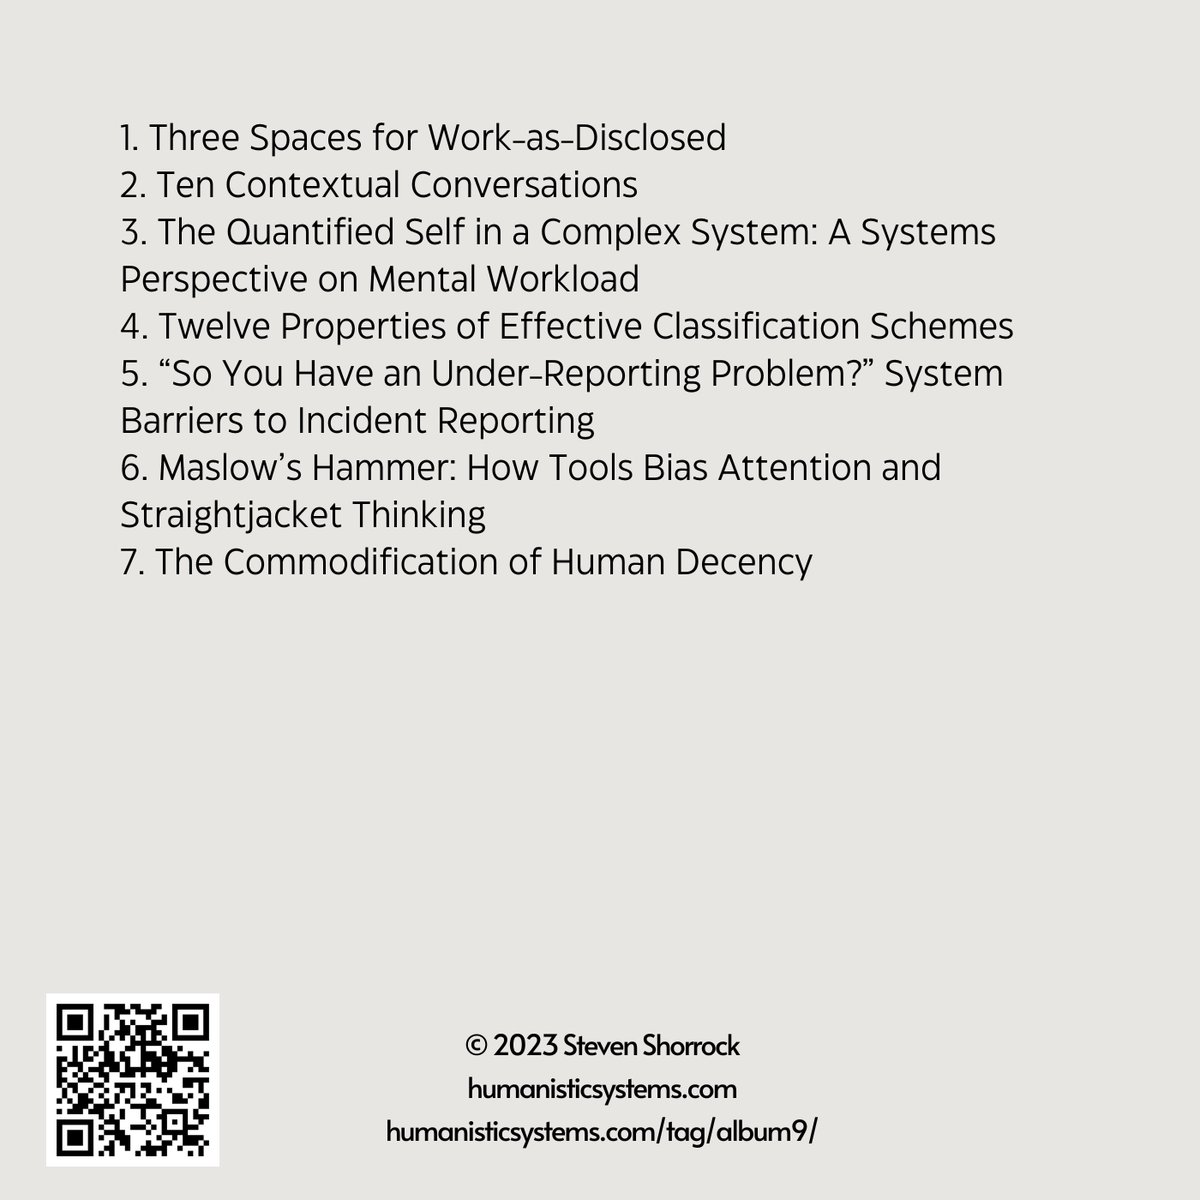 The ninth album from Humanistic Systems: 
▶ Method 

On the interactive pdf, click on a title on the back to read, or scan the QR code to find all posts.

Interactive PDF: bit.ly/album09
Posts: humanisticsystems.com/tag/album9/
All albums and EPs: humanisticsystems.com/series/